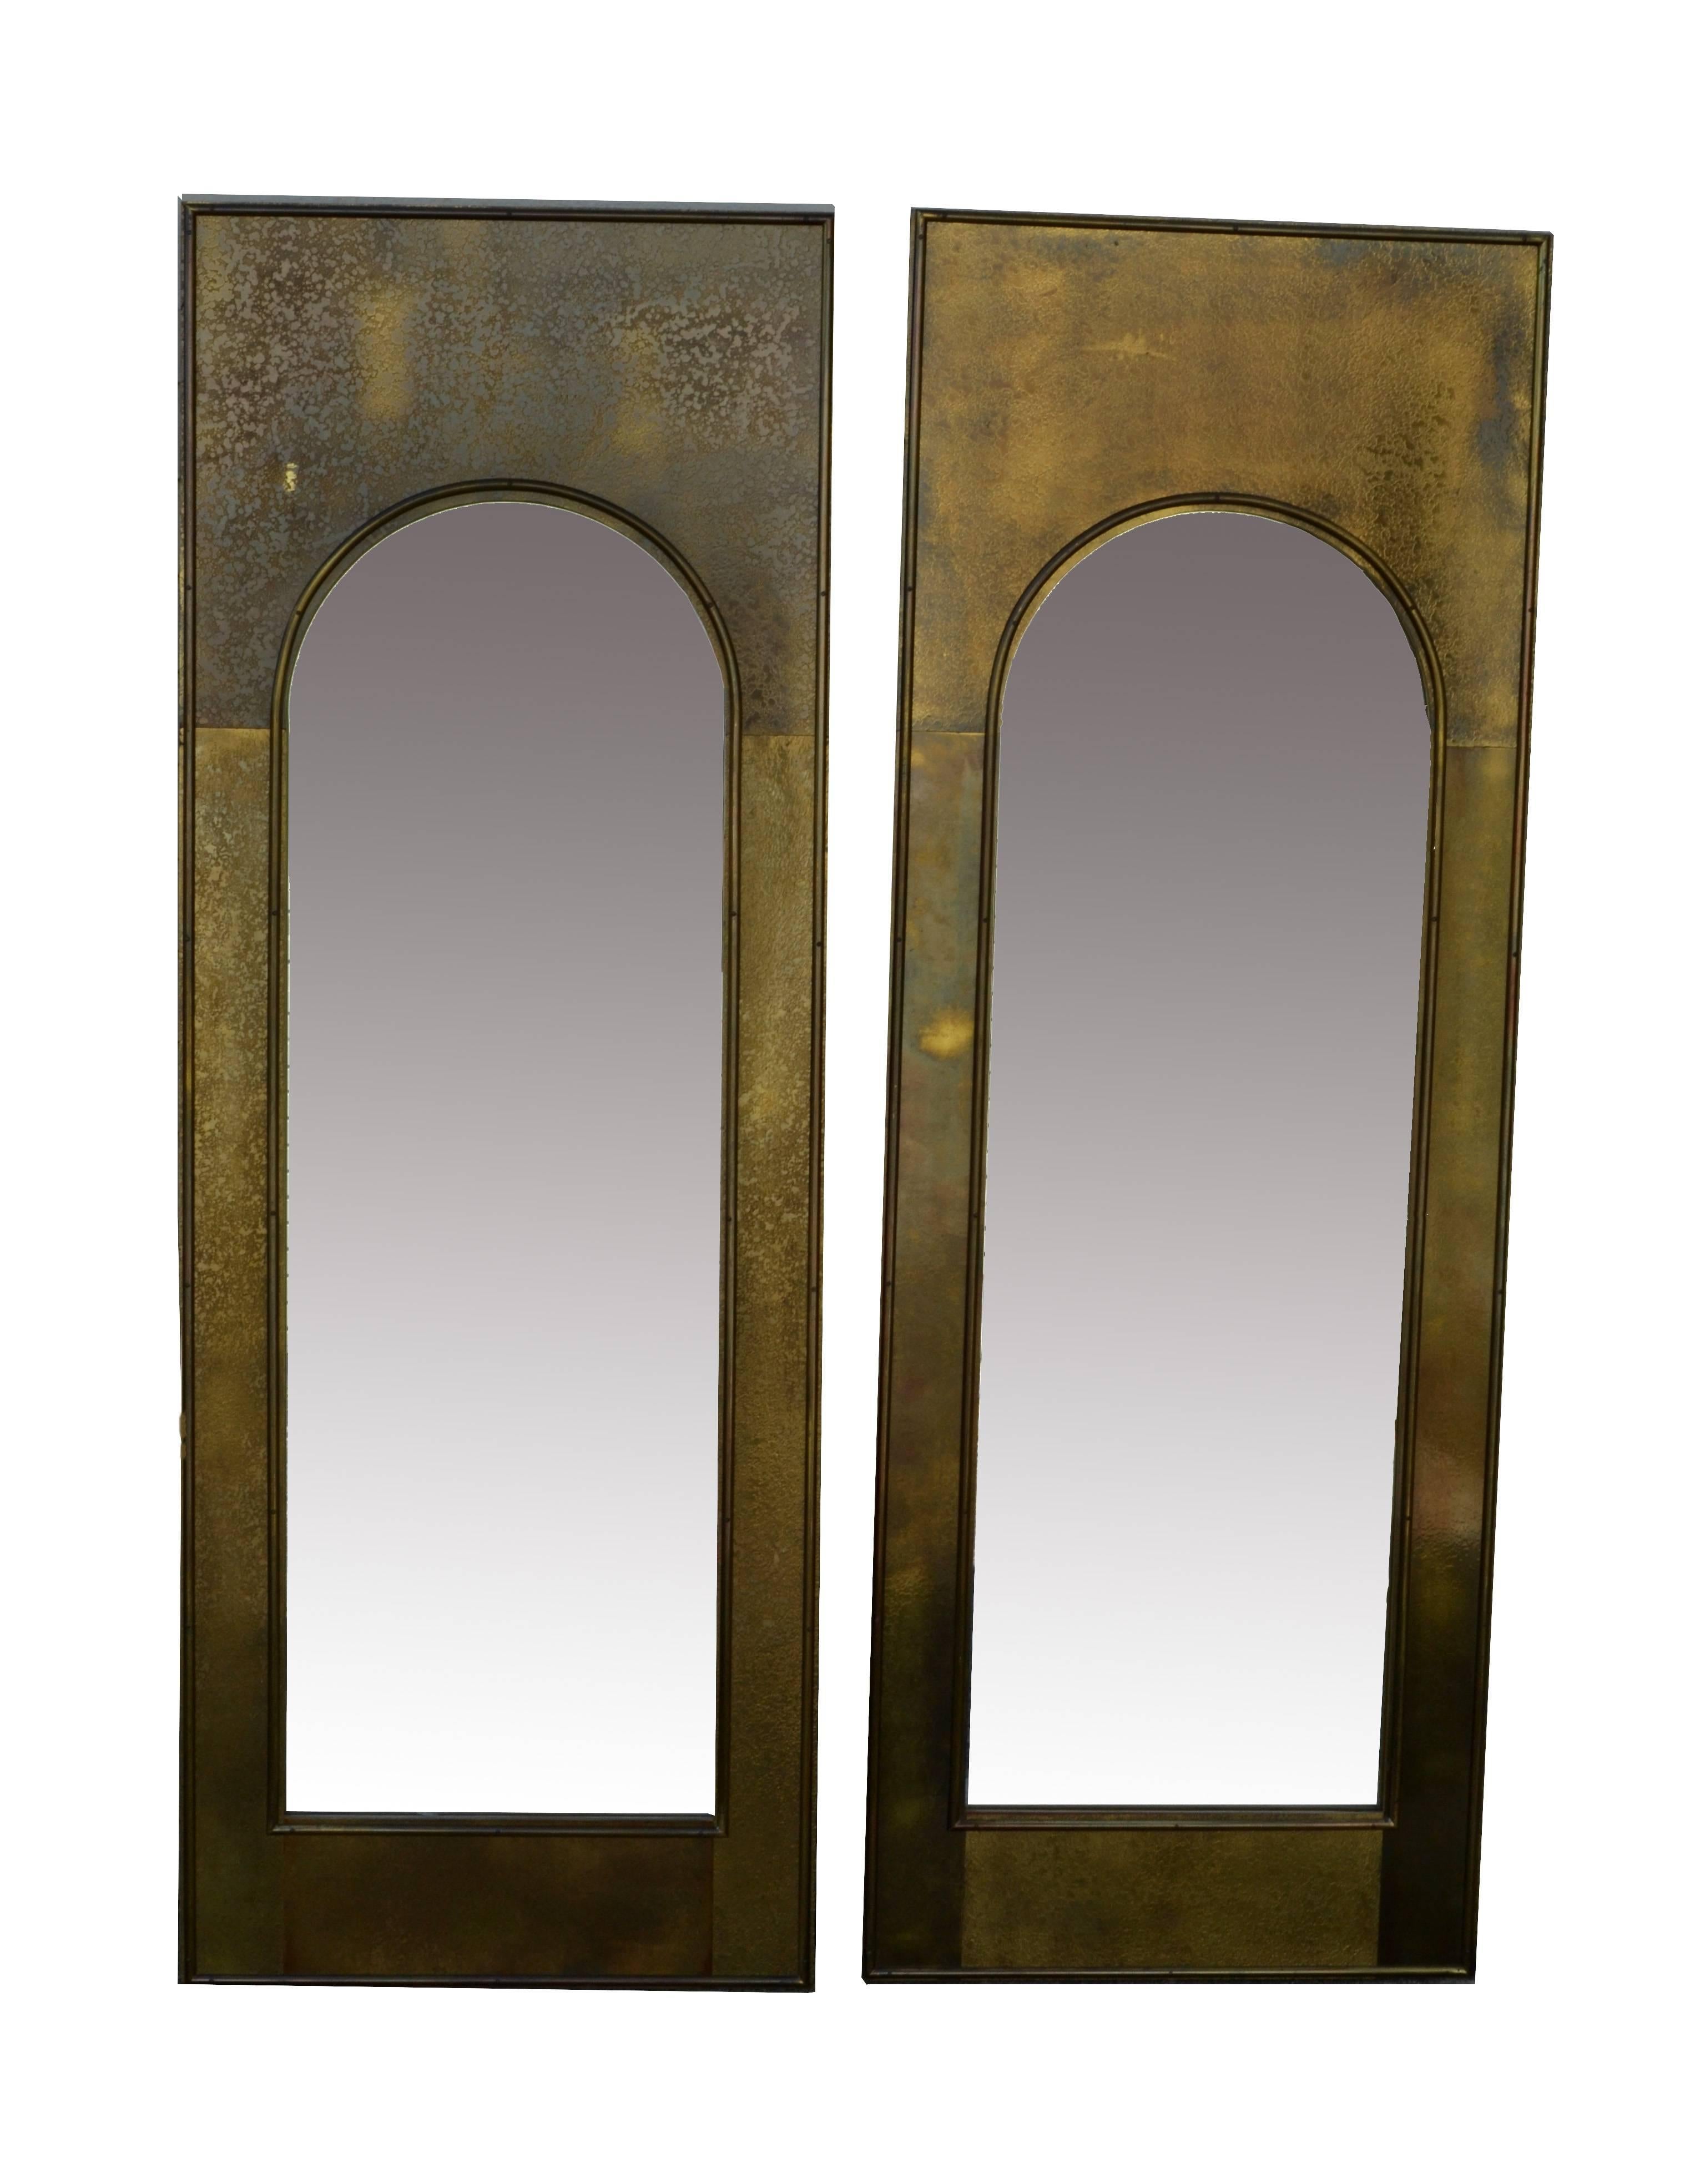 20th Century Pair of Golden Etched Brass Arched Palladian Mastercraft Mirrors